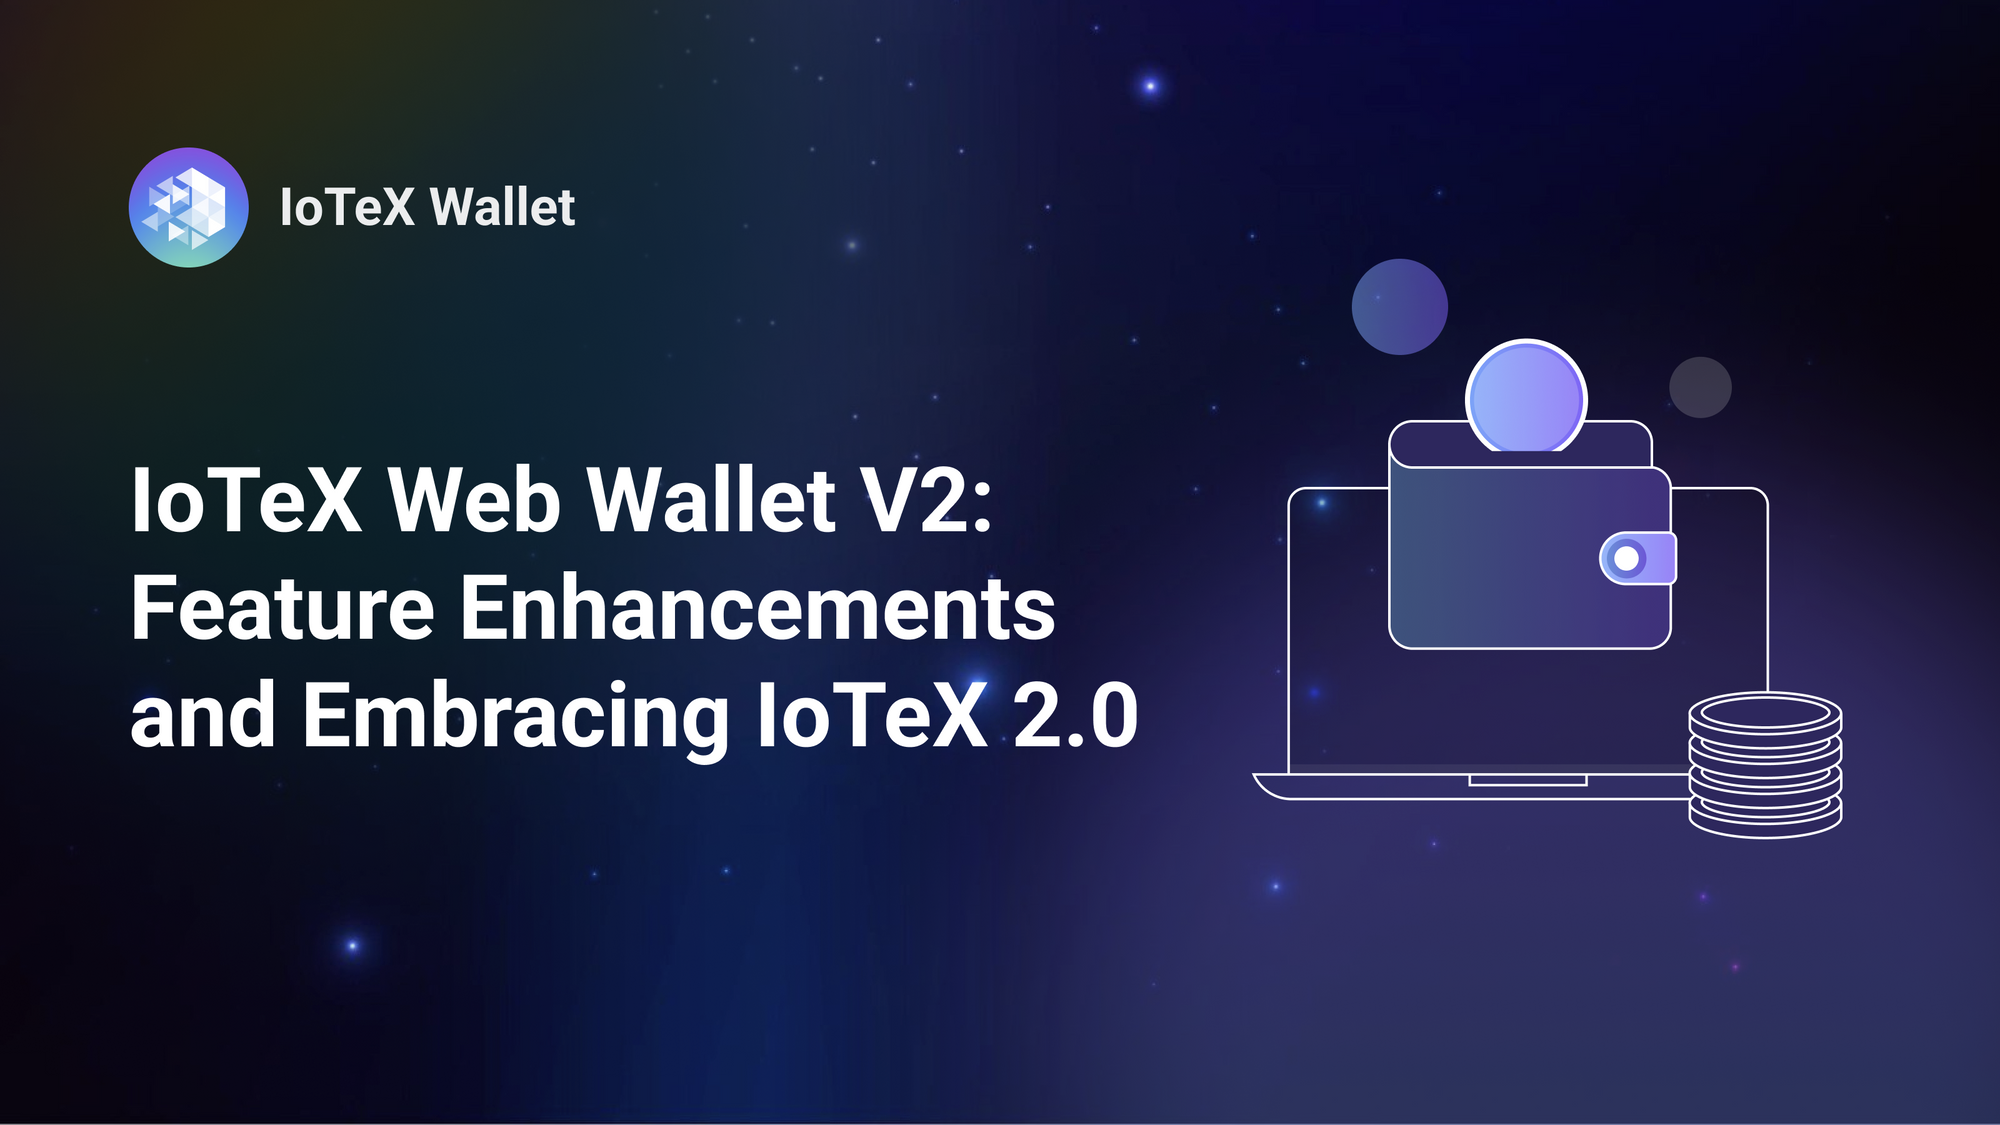 iotex-web-wallet-v2-is-the-all-in-one-depin-asset-manager